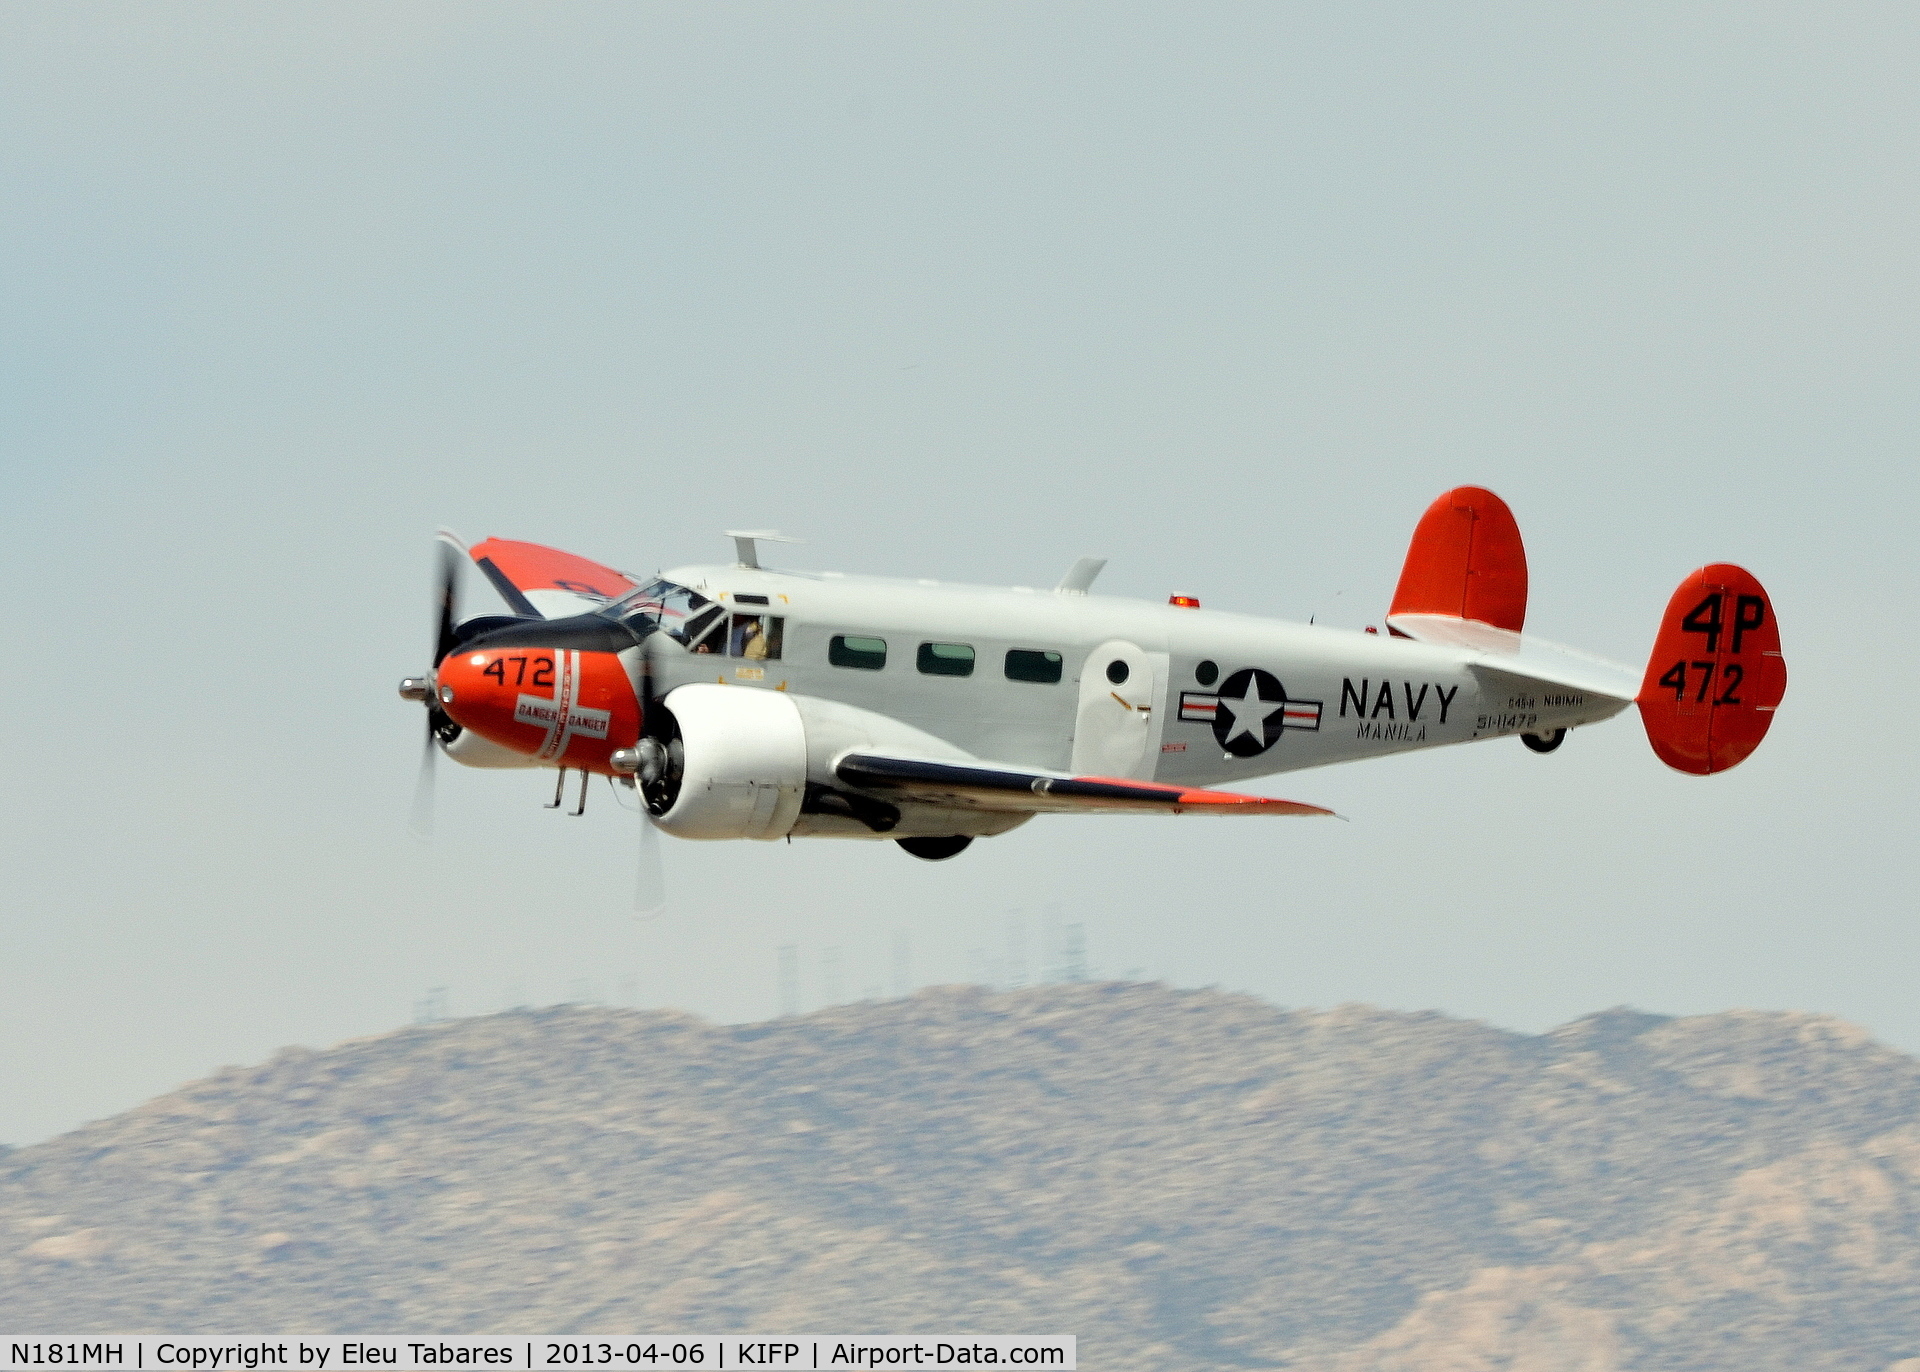 N181MH, 1951 Beech C-45H Expeditor C/N AF-29, Taken during Legends Over The Colorado River Fly-in.